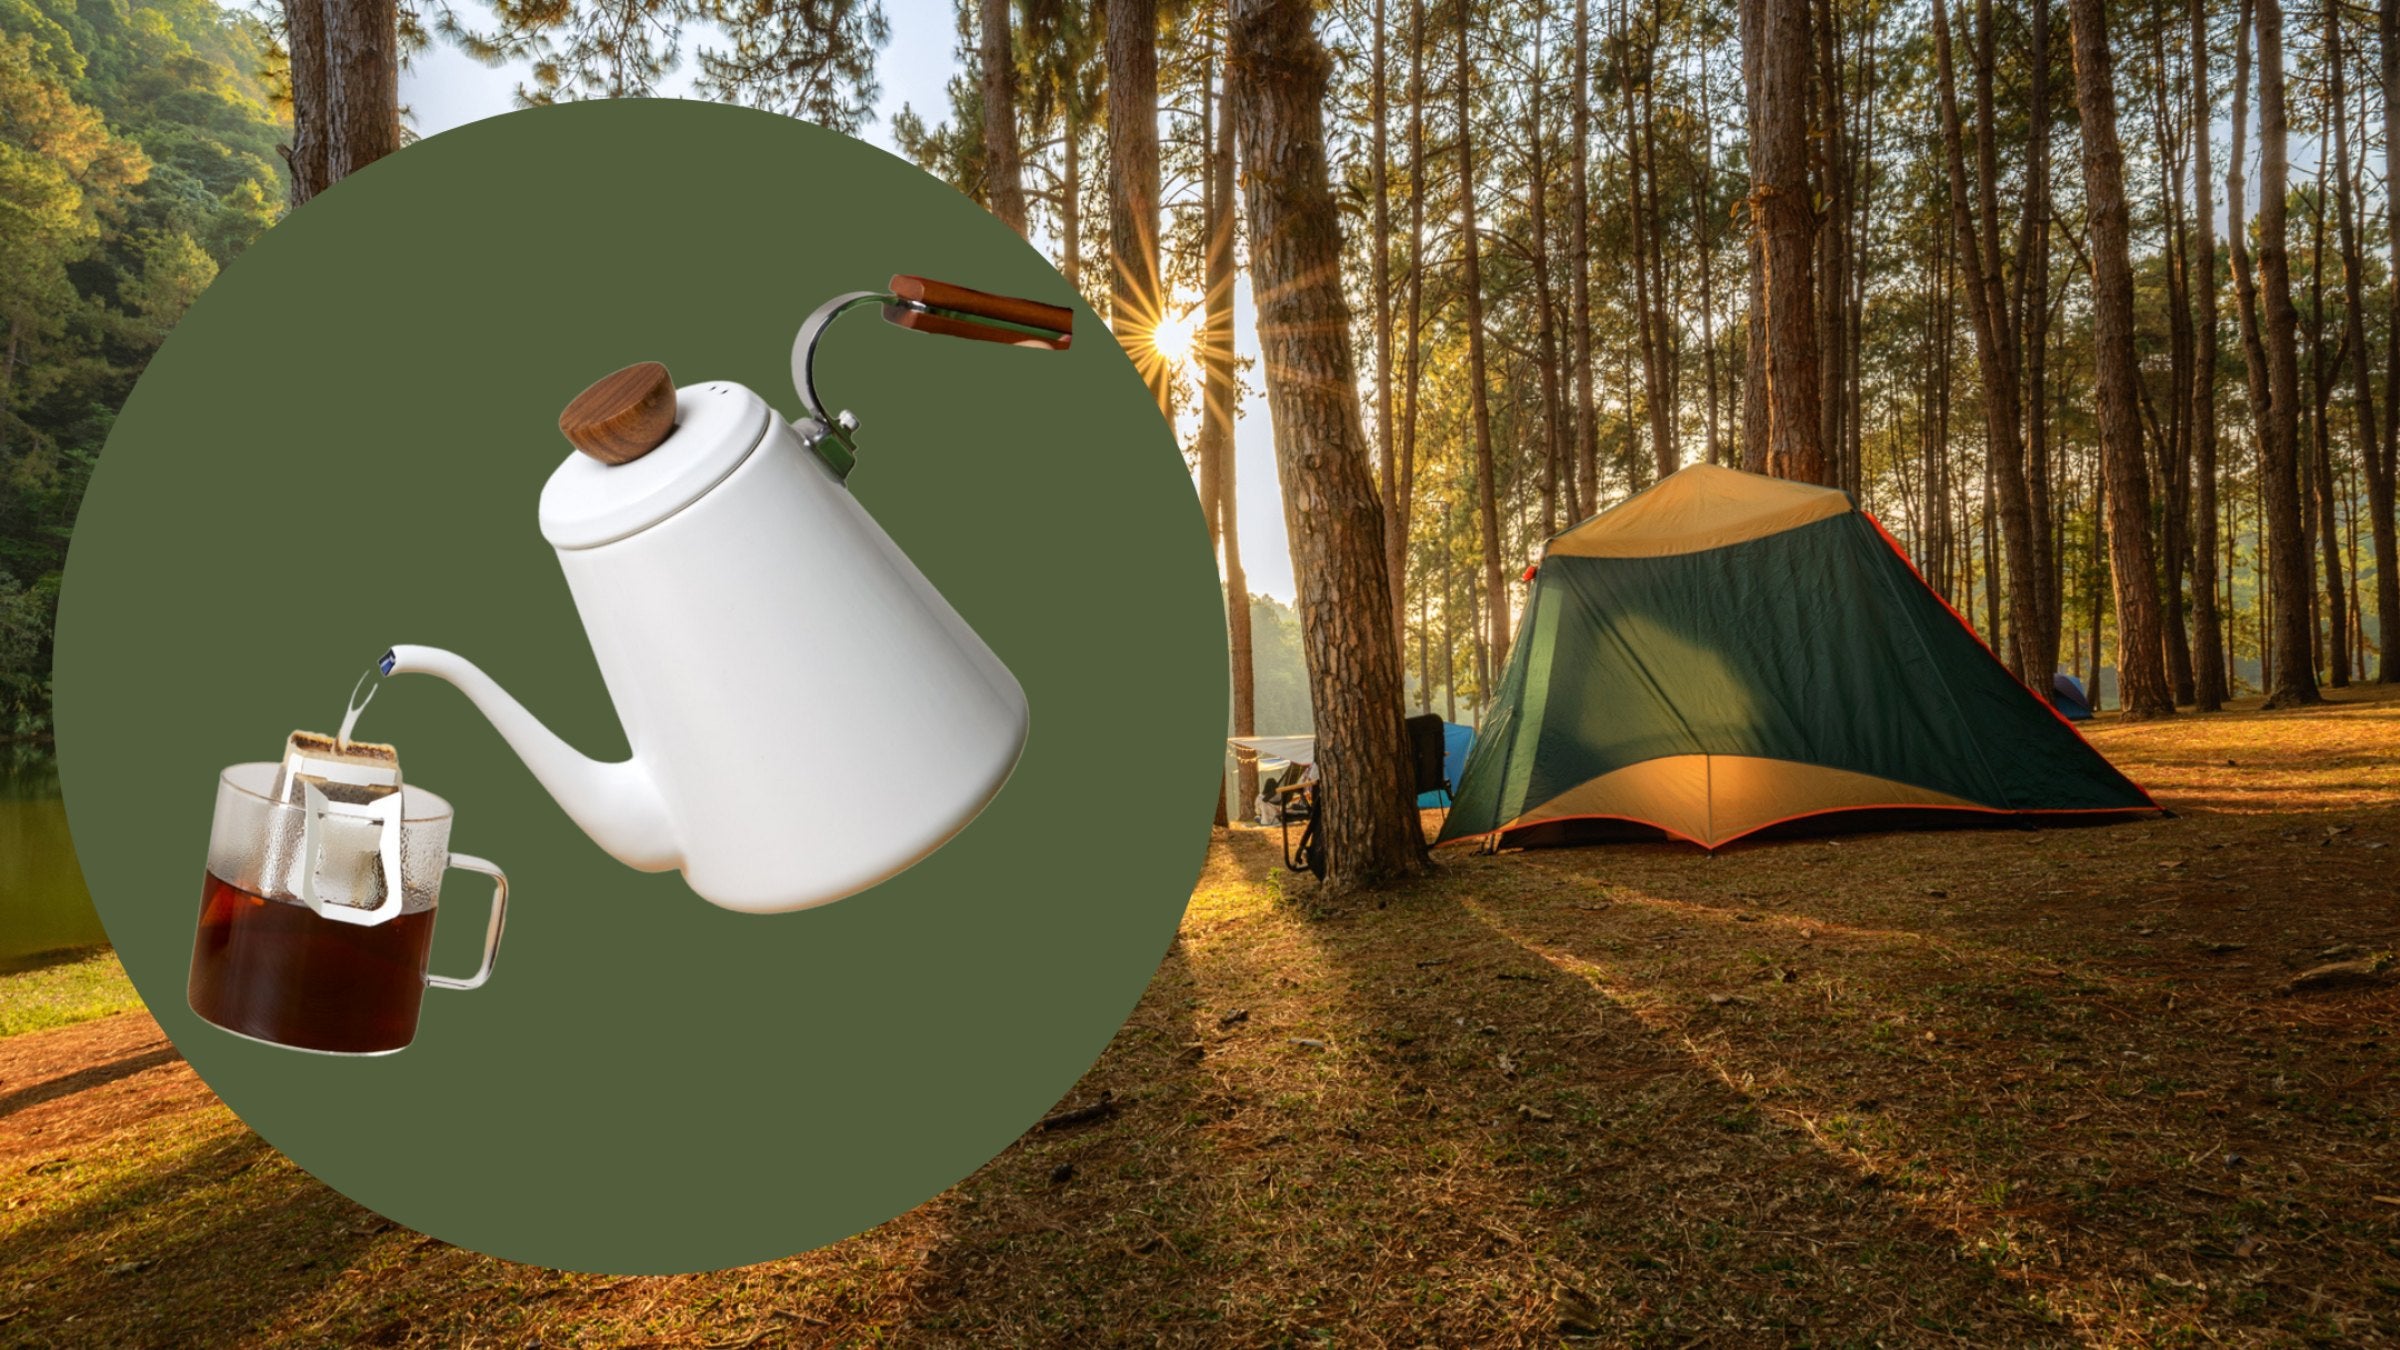 Camping Coffee: How to Make Delicious Coffee Outdoors - Go Wander Wild